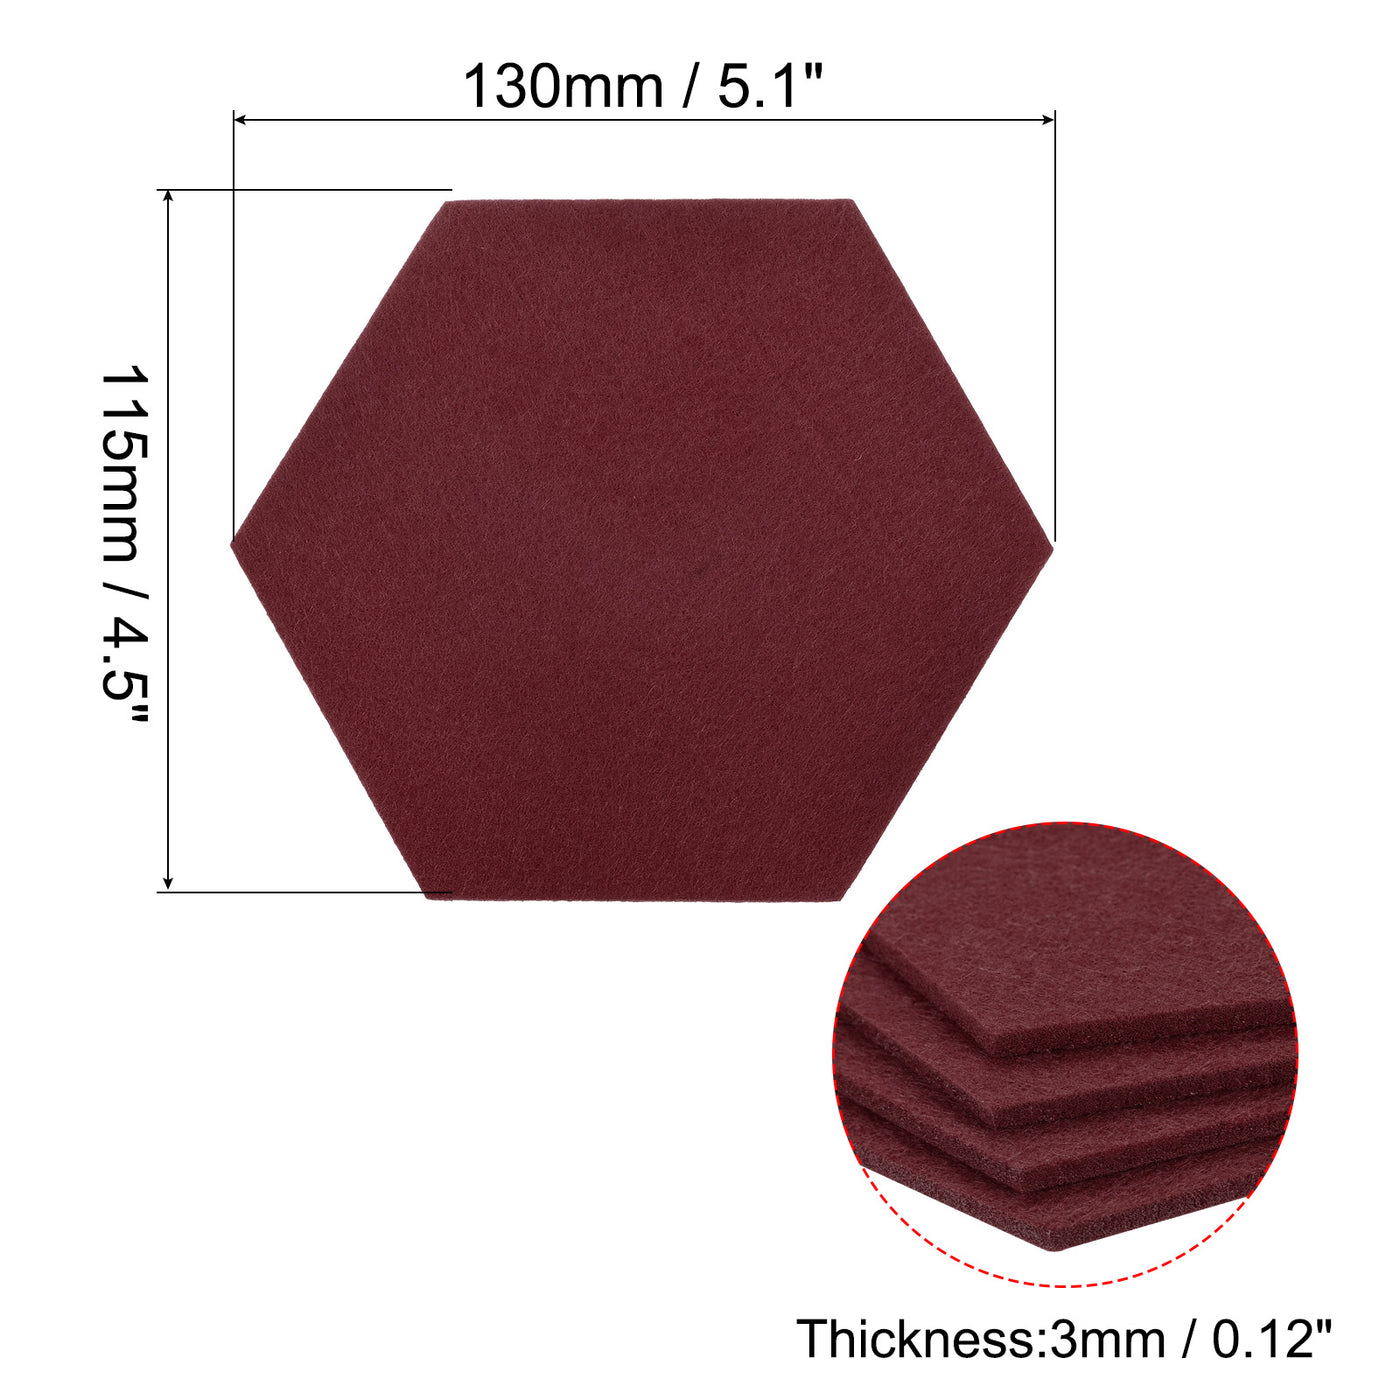 uxcell Uxcell Felt Coasters 4pcs Absorbent Pad Coaster for Drink Cup Pot Bowl Vase Wine Red